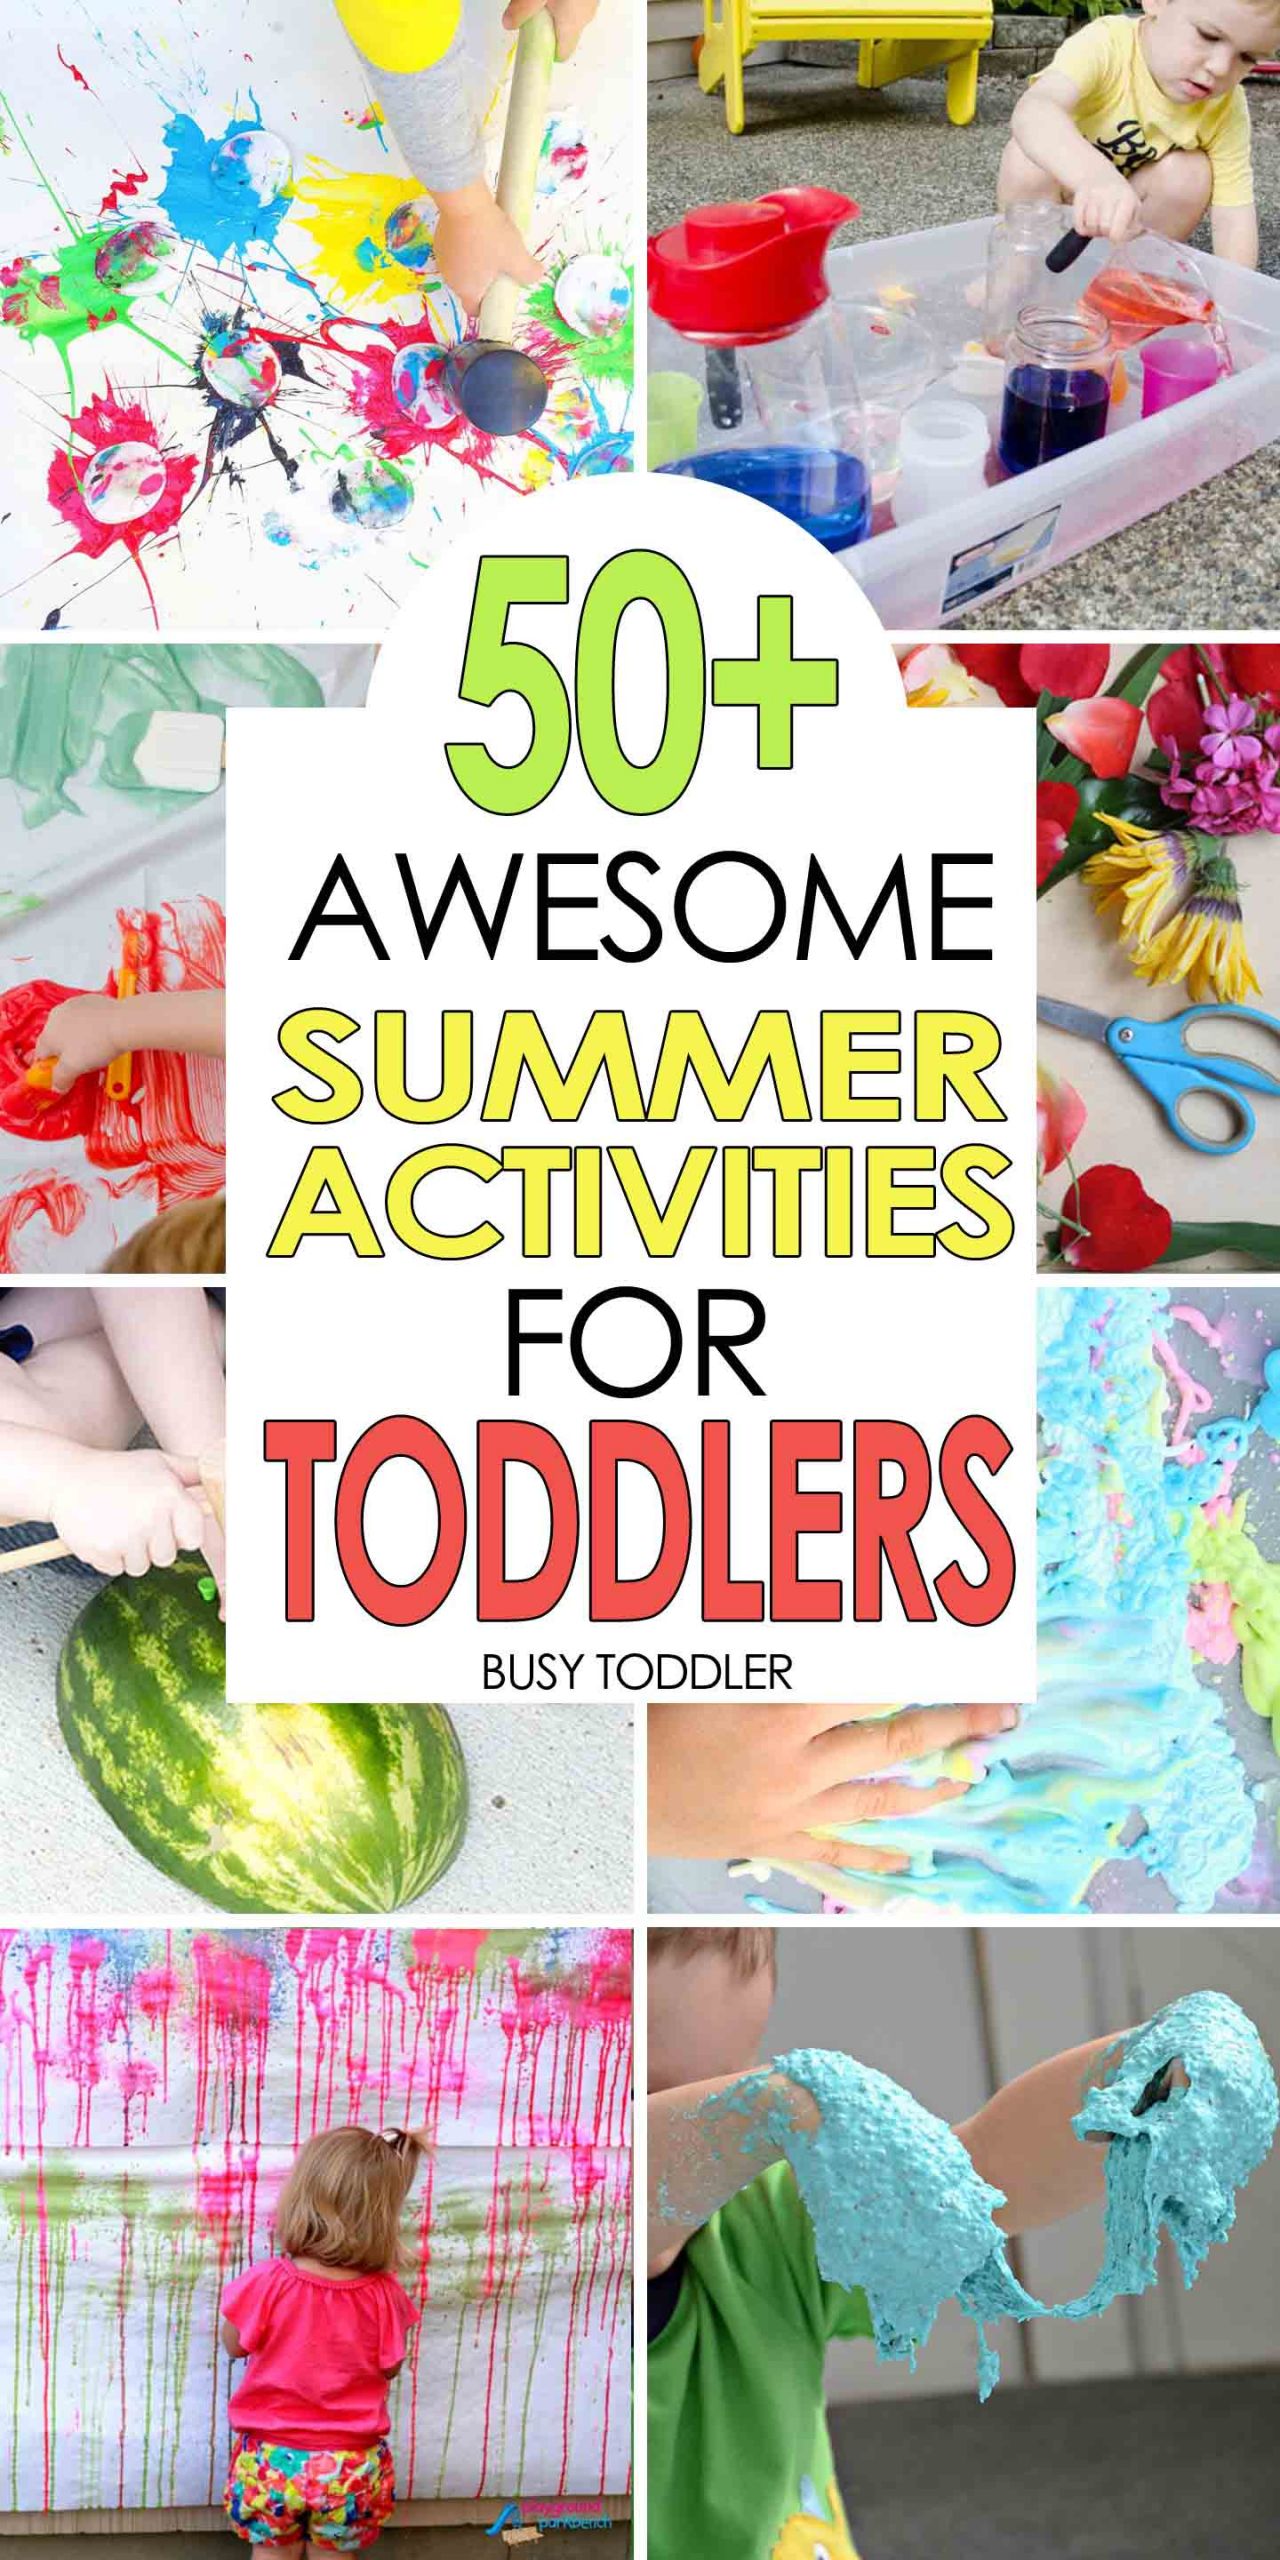 Fun Summer Activities For Toddlers
 50 Awesome Summer Activities for Toddlers Busy Toddler